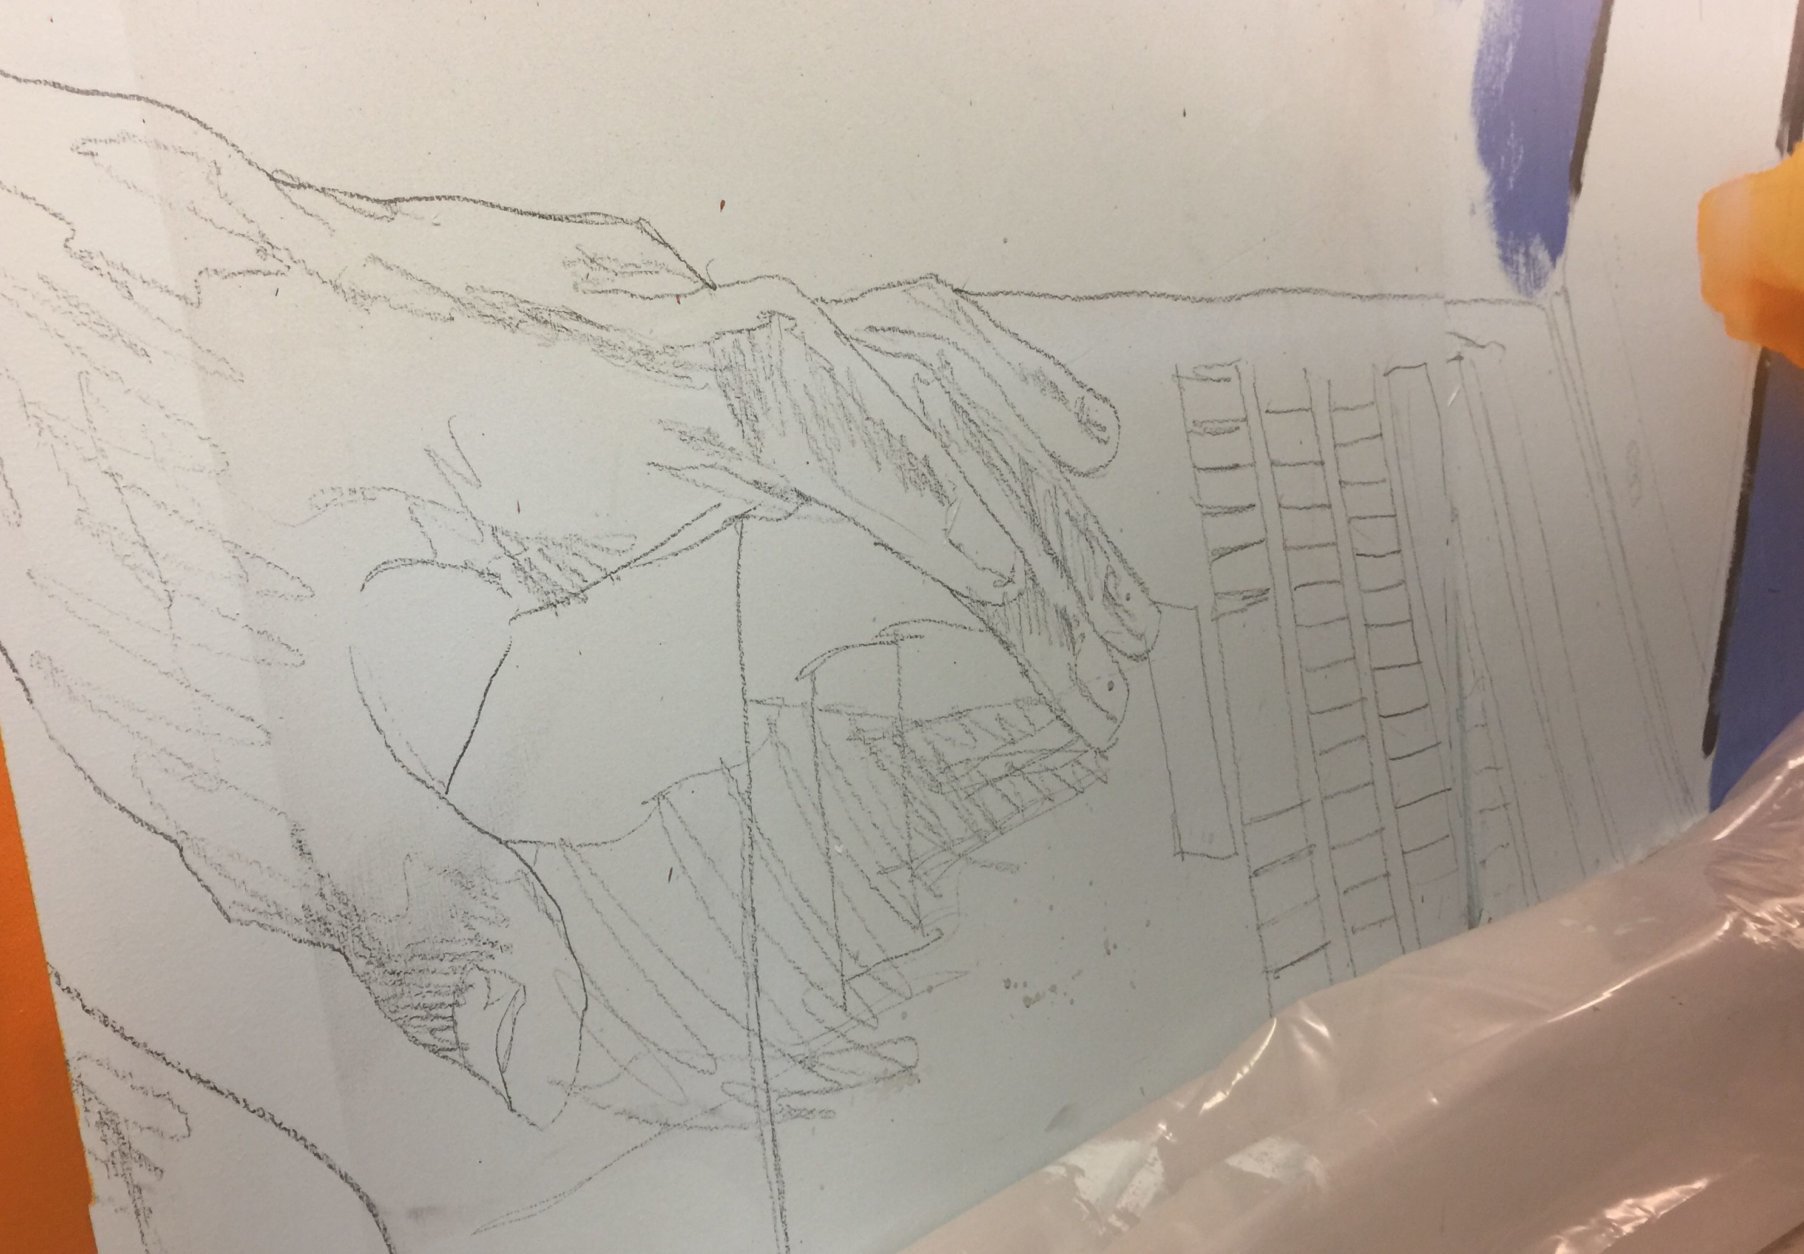 These sketched hands eventually will depict a child's fingers on a computer keyboard. (WTOP/Kristi King)